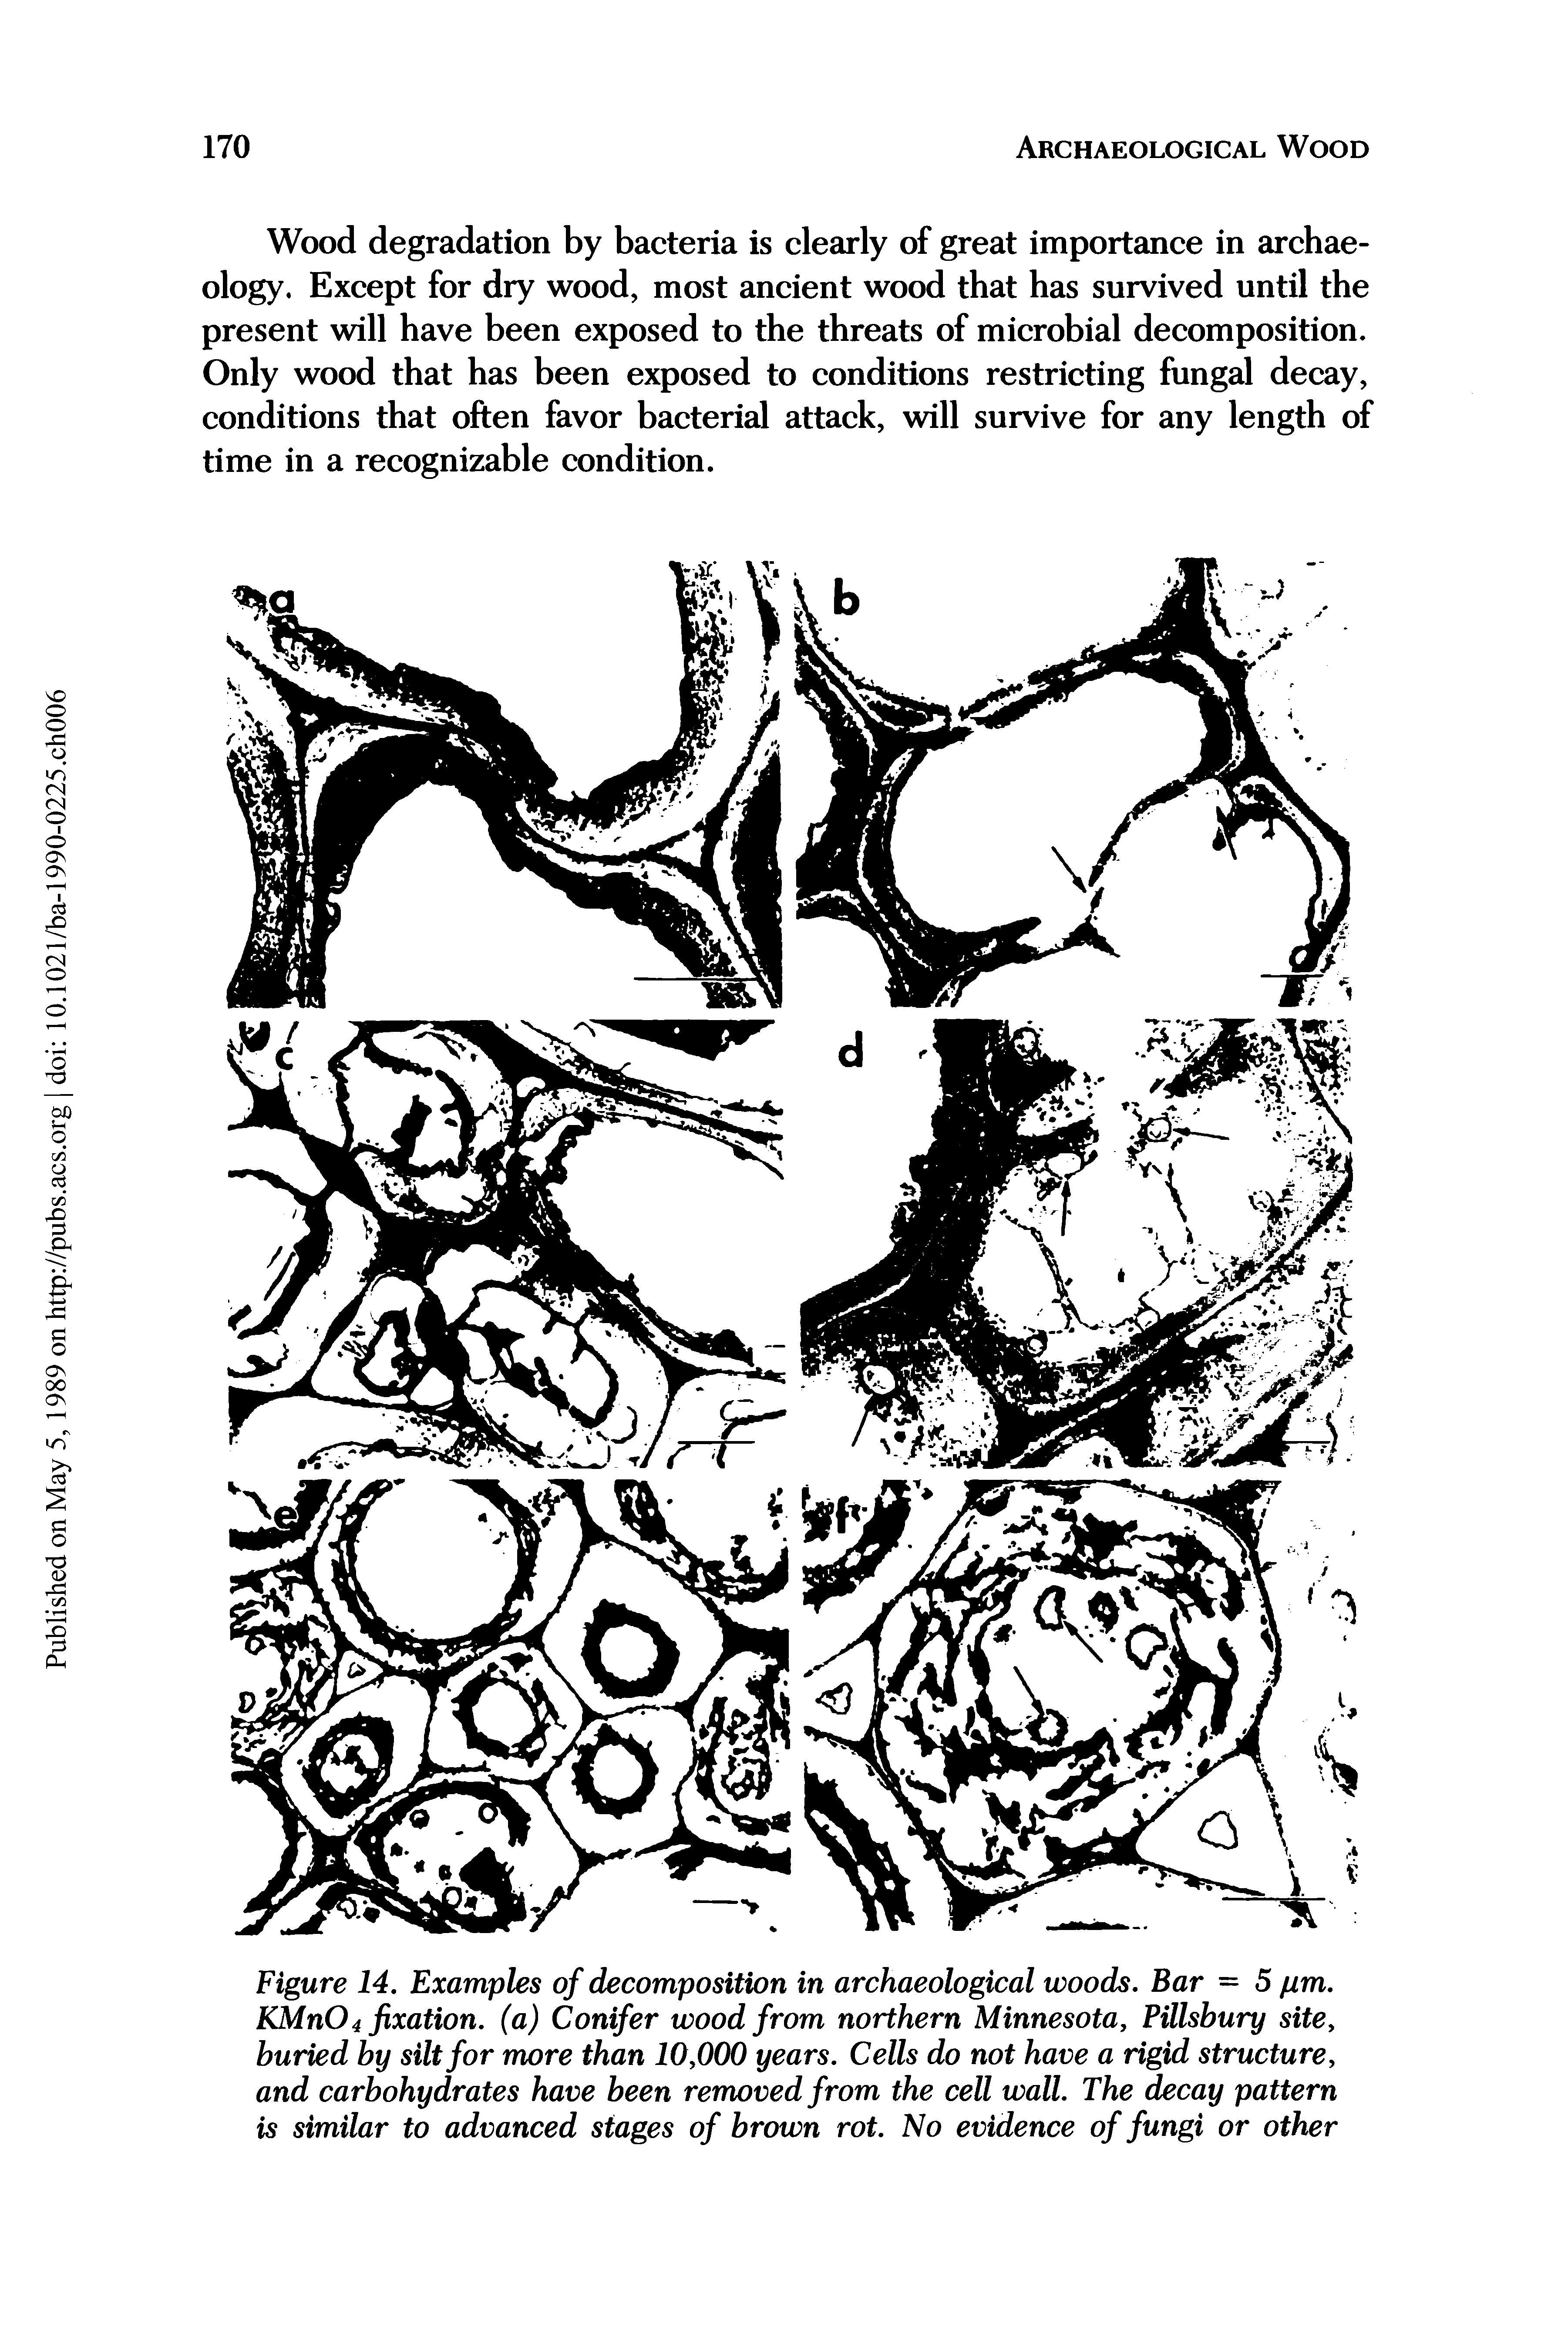 Figure 14. Examples of decomposition in archaeological woods. Bar = 5 pm. KMnO4 fixation, (a) Conifer wood from northern Minnesota, PUlsbury site, buried by silt for more than 10,000 years. Cells do not have a rigid structure, and carbohydrates have been removed from the cell wall. The decay pattern is similar to advanced stages of brown rot. No evidence of fungi or other...